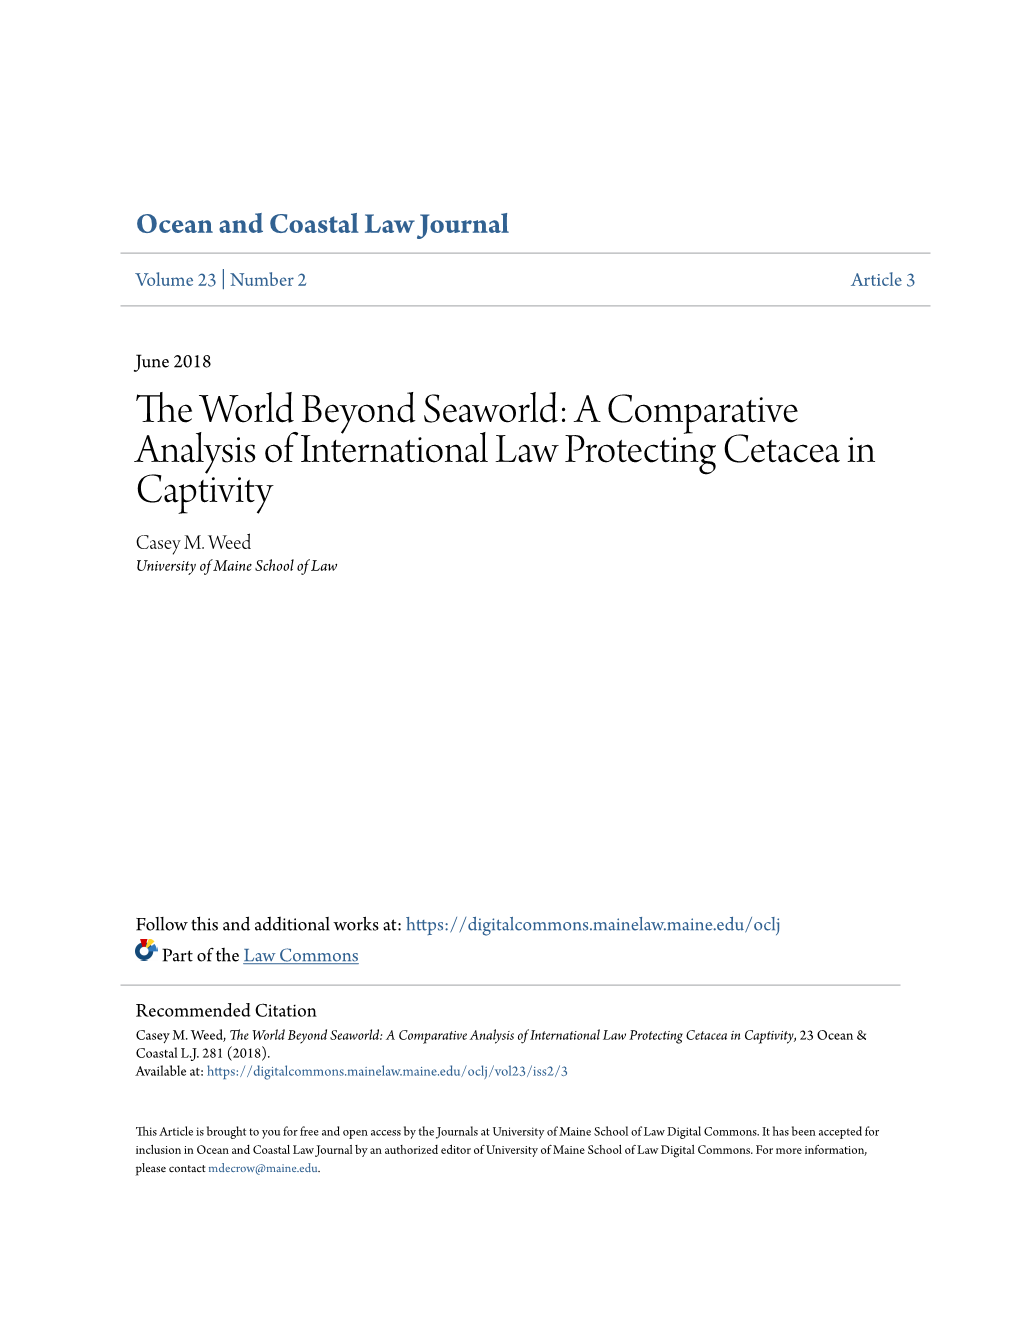 The World Beyond Seaworld: a Comparative Analysis of International Law Protecting Cetacea in Captivity, 23 Ocean & Coastal L.J